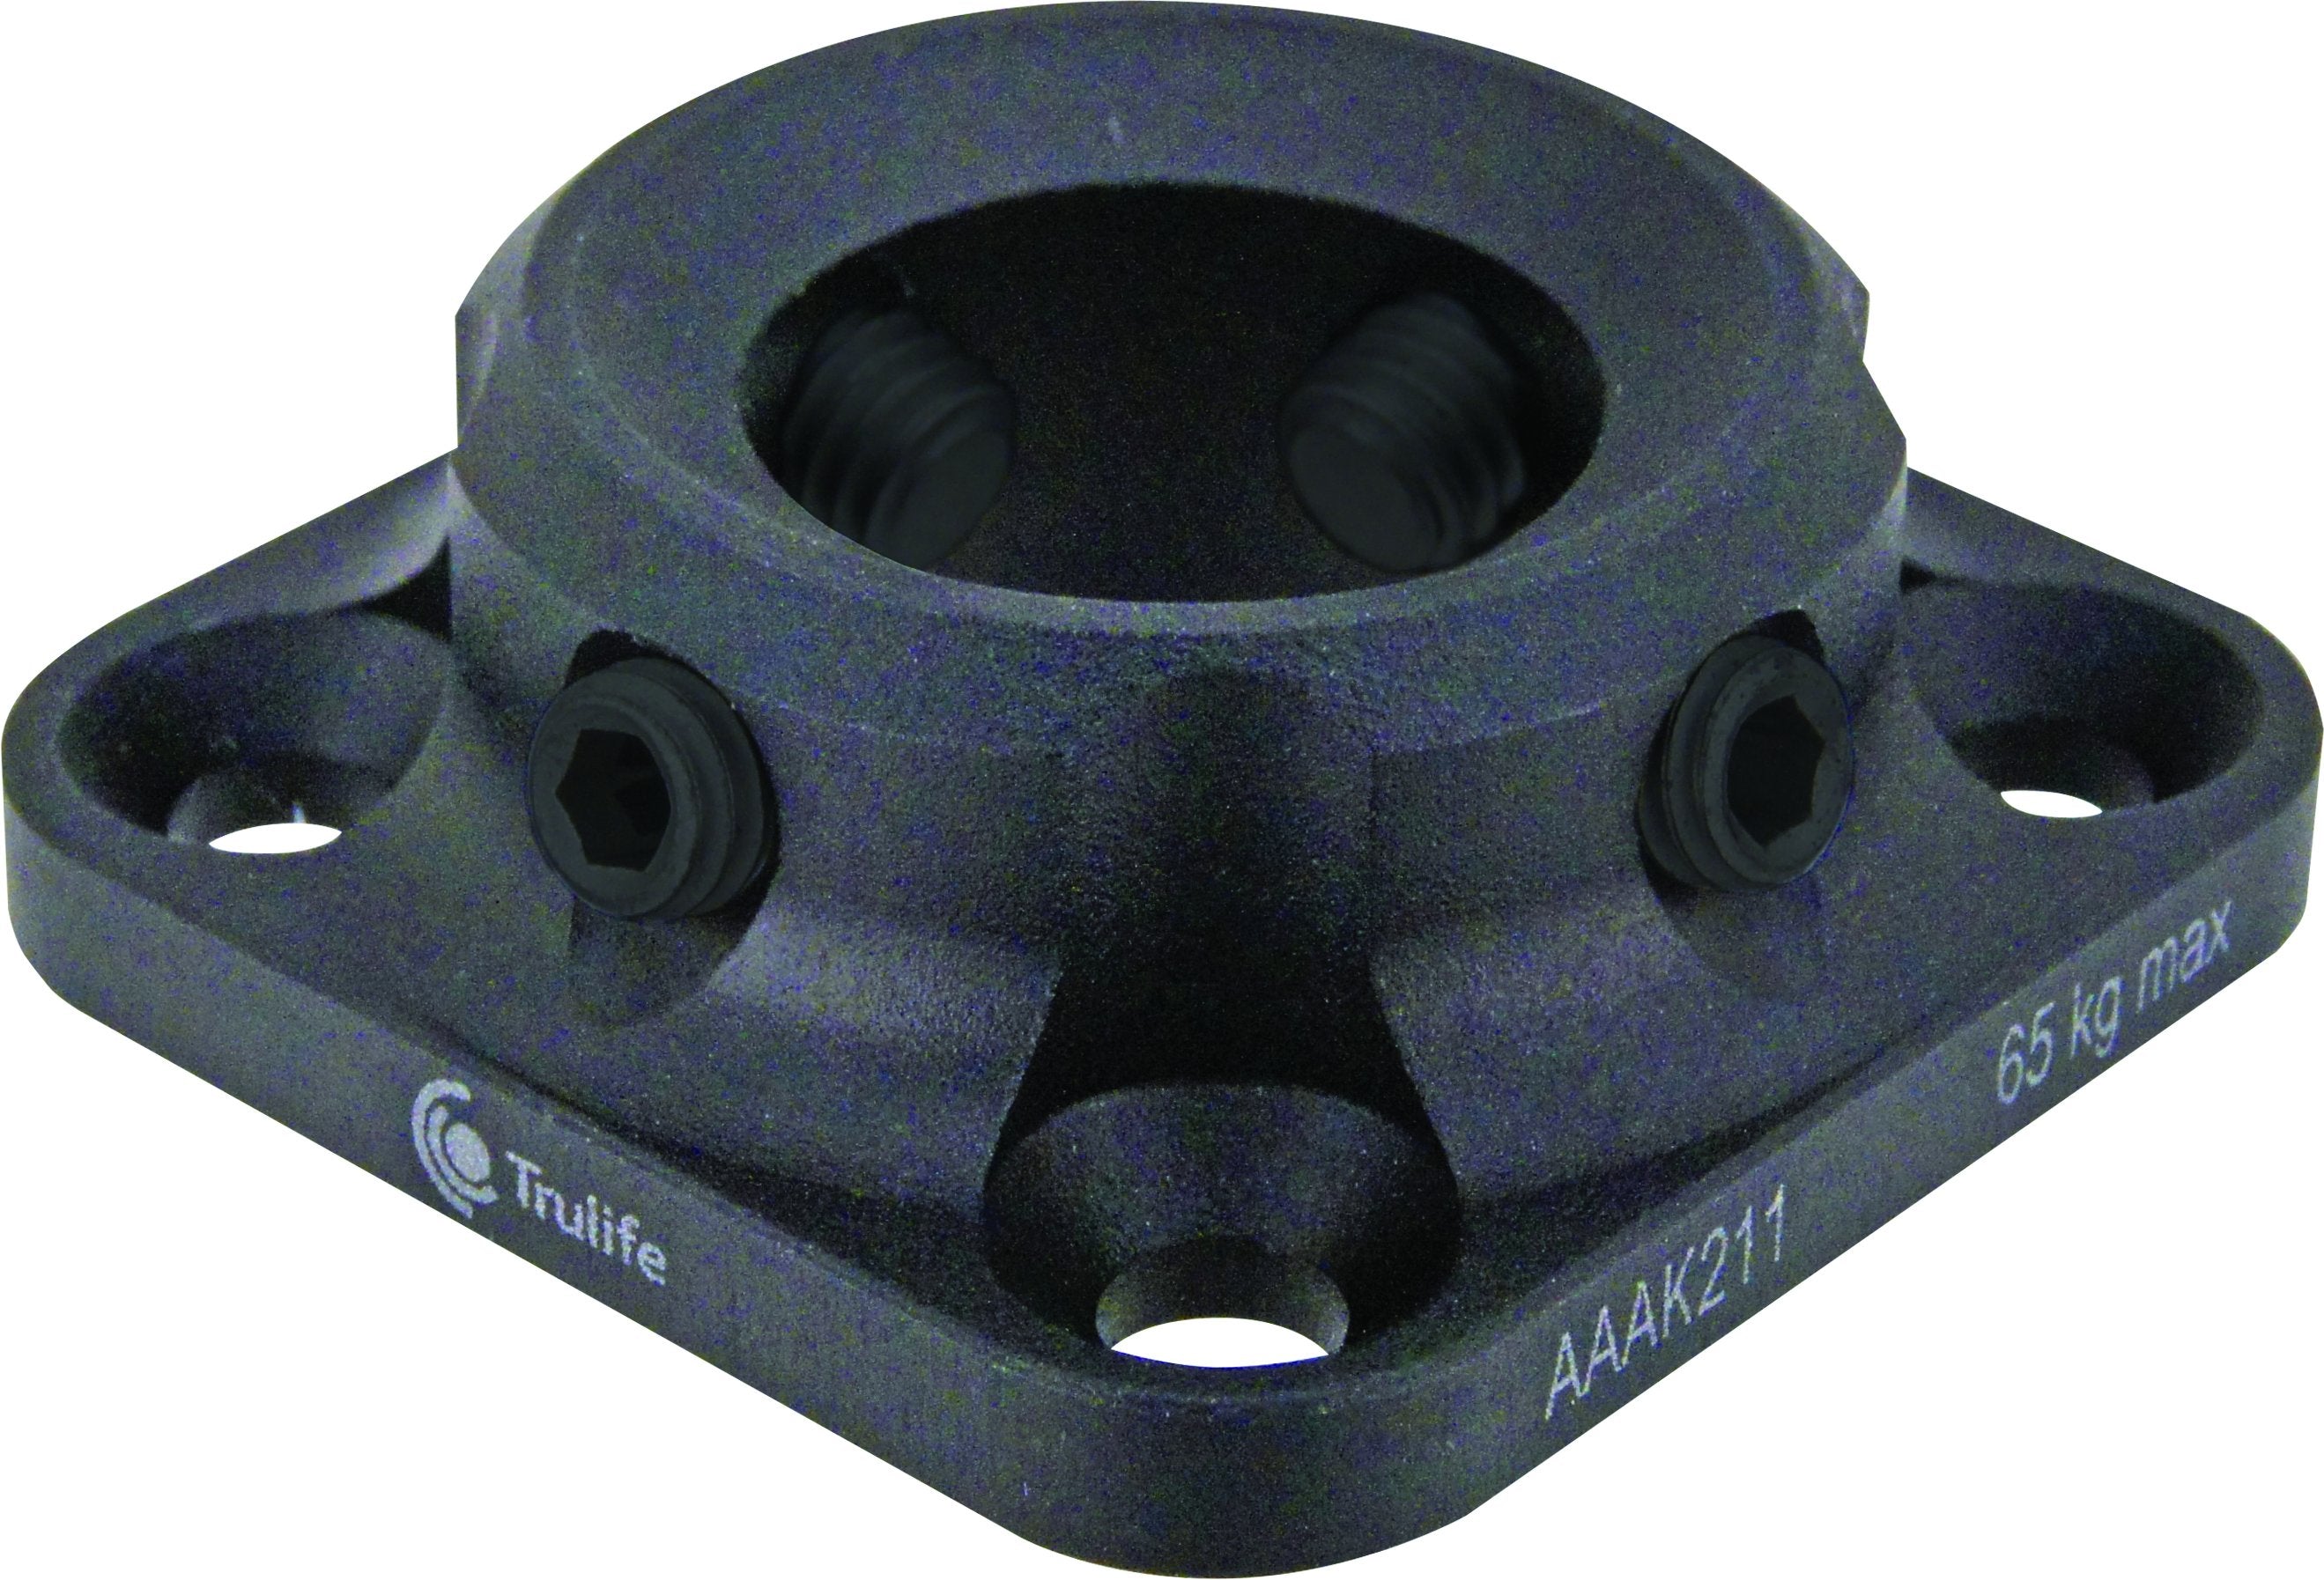 AAAK211 Child’s Play 4-Hole Female Adapter